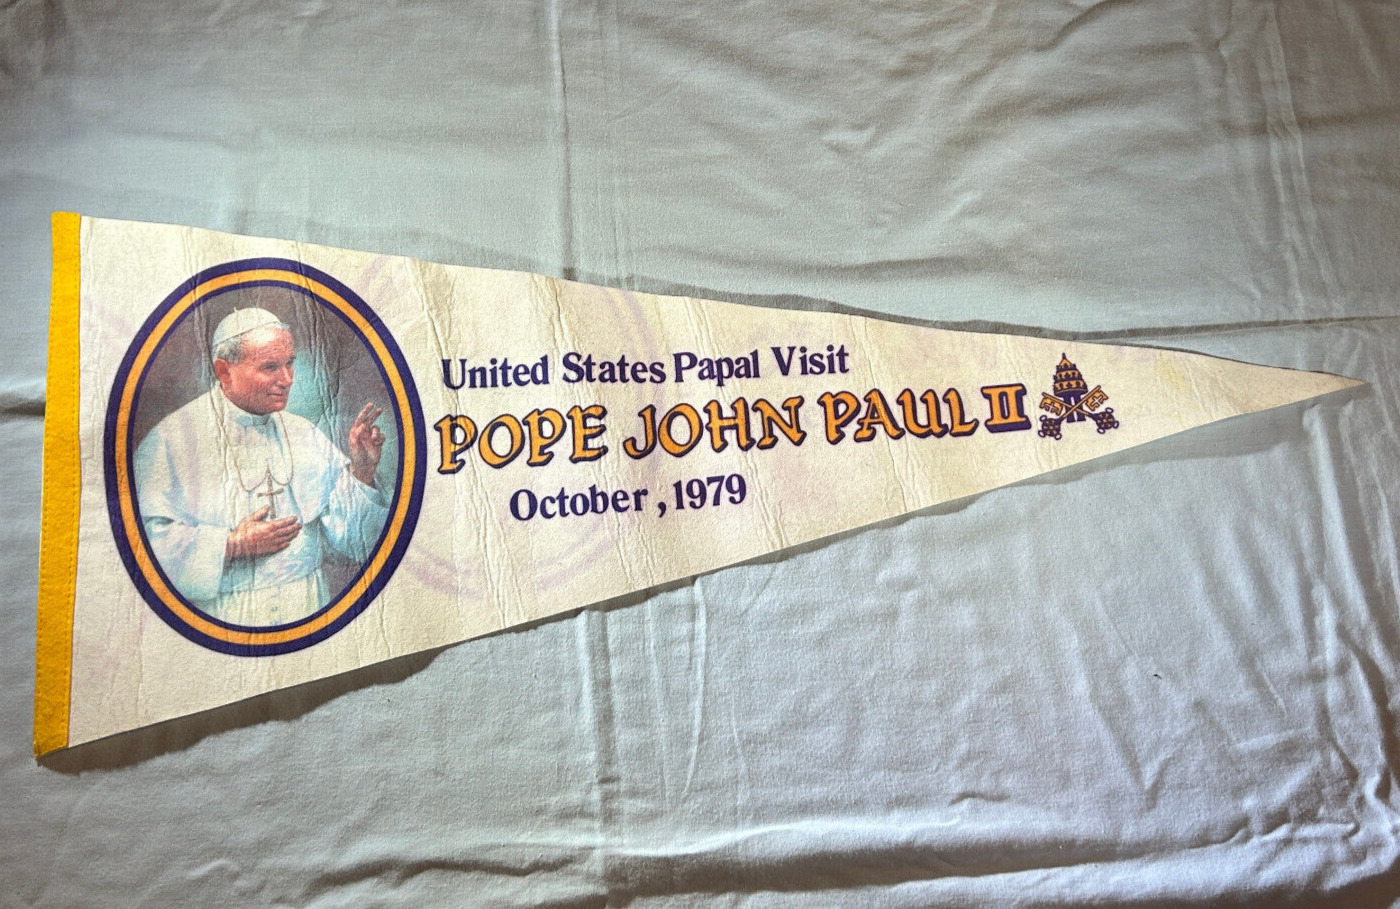 POPE JOHN PAUL II OCTOBER 1979 UNITED STATES PAPAL VISIT COLLECTIBLE PENNANT VTG